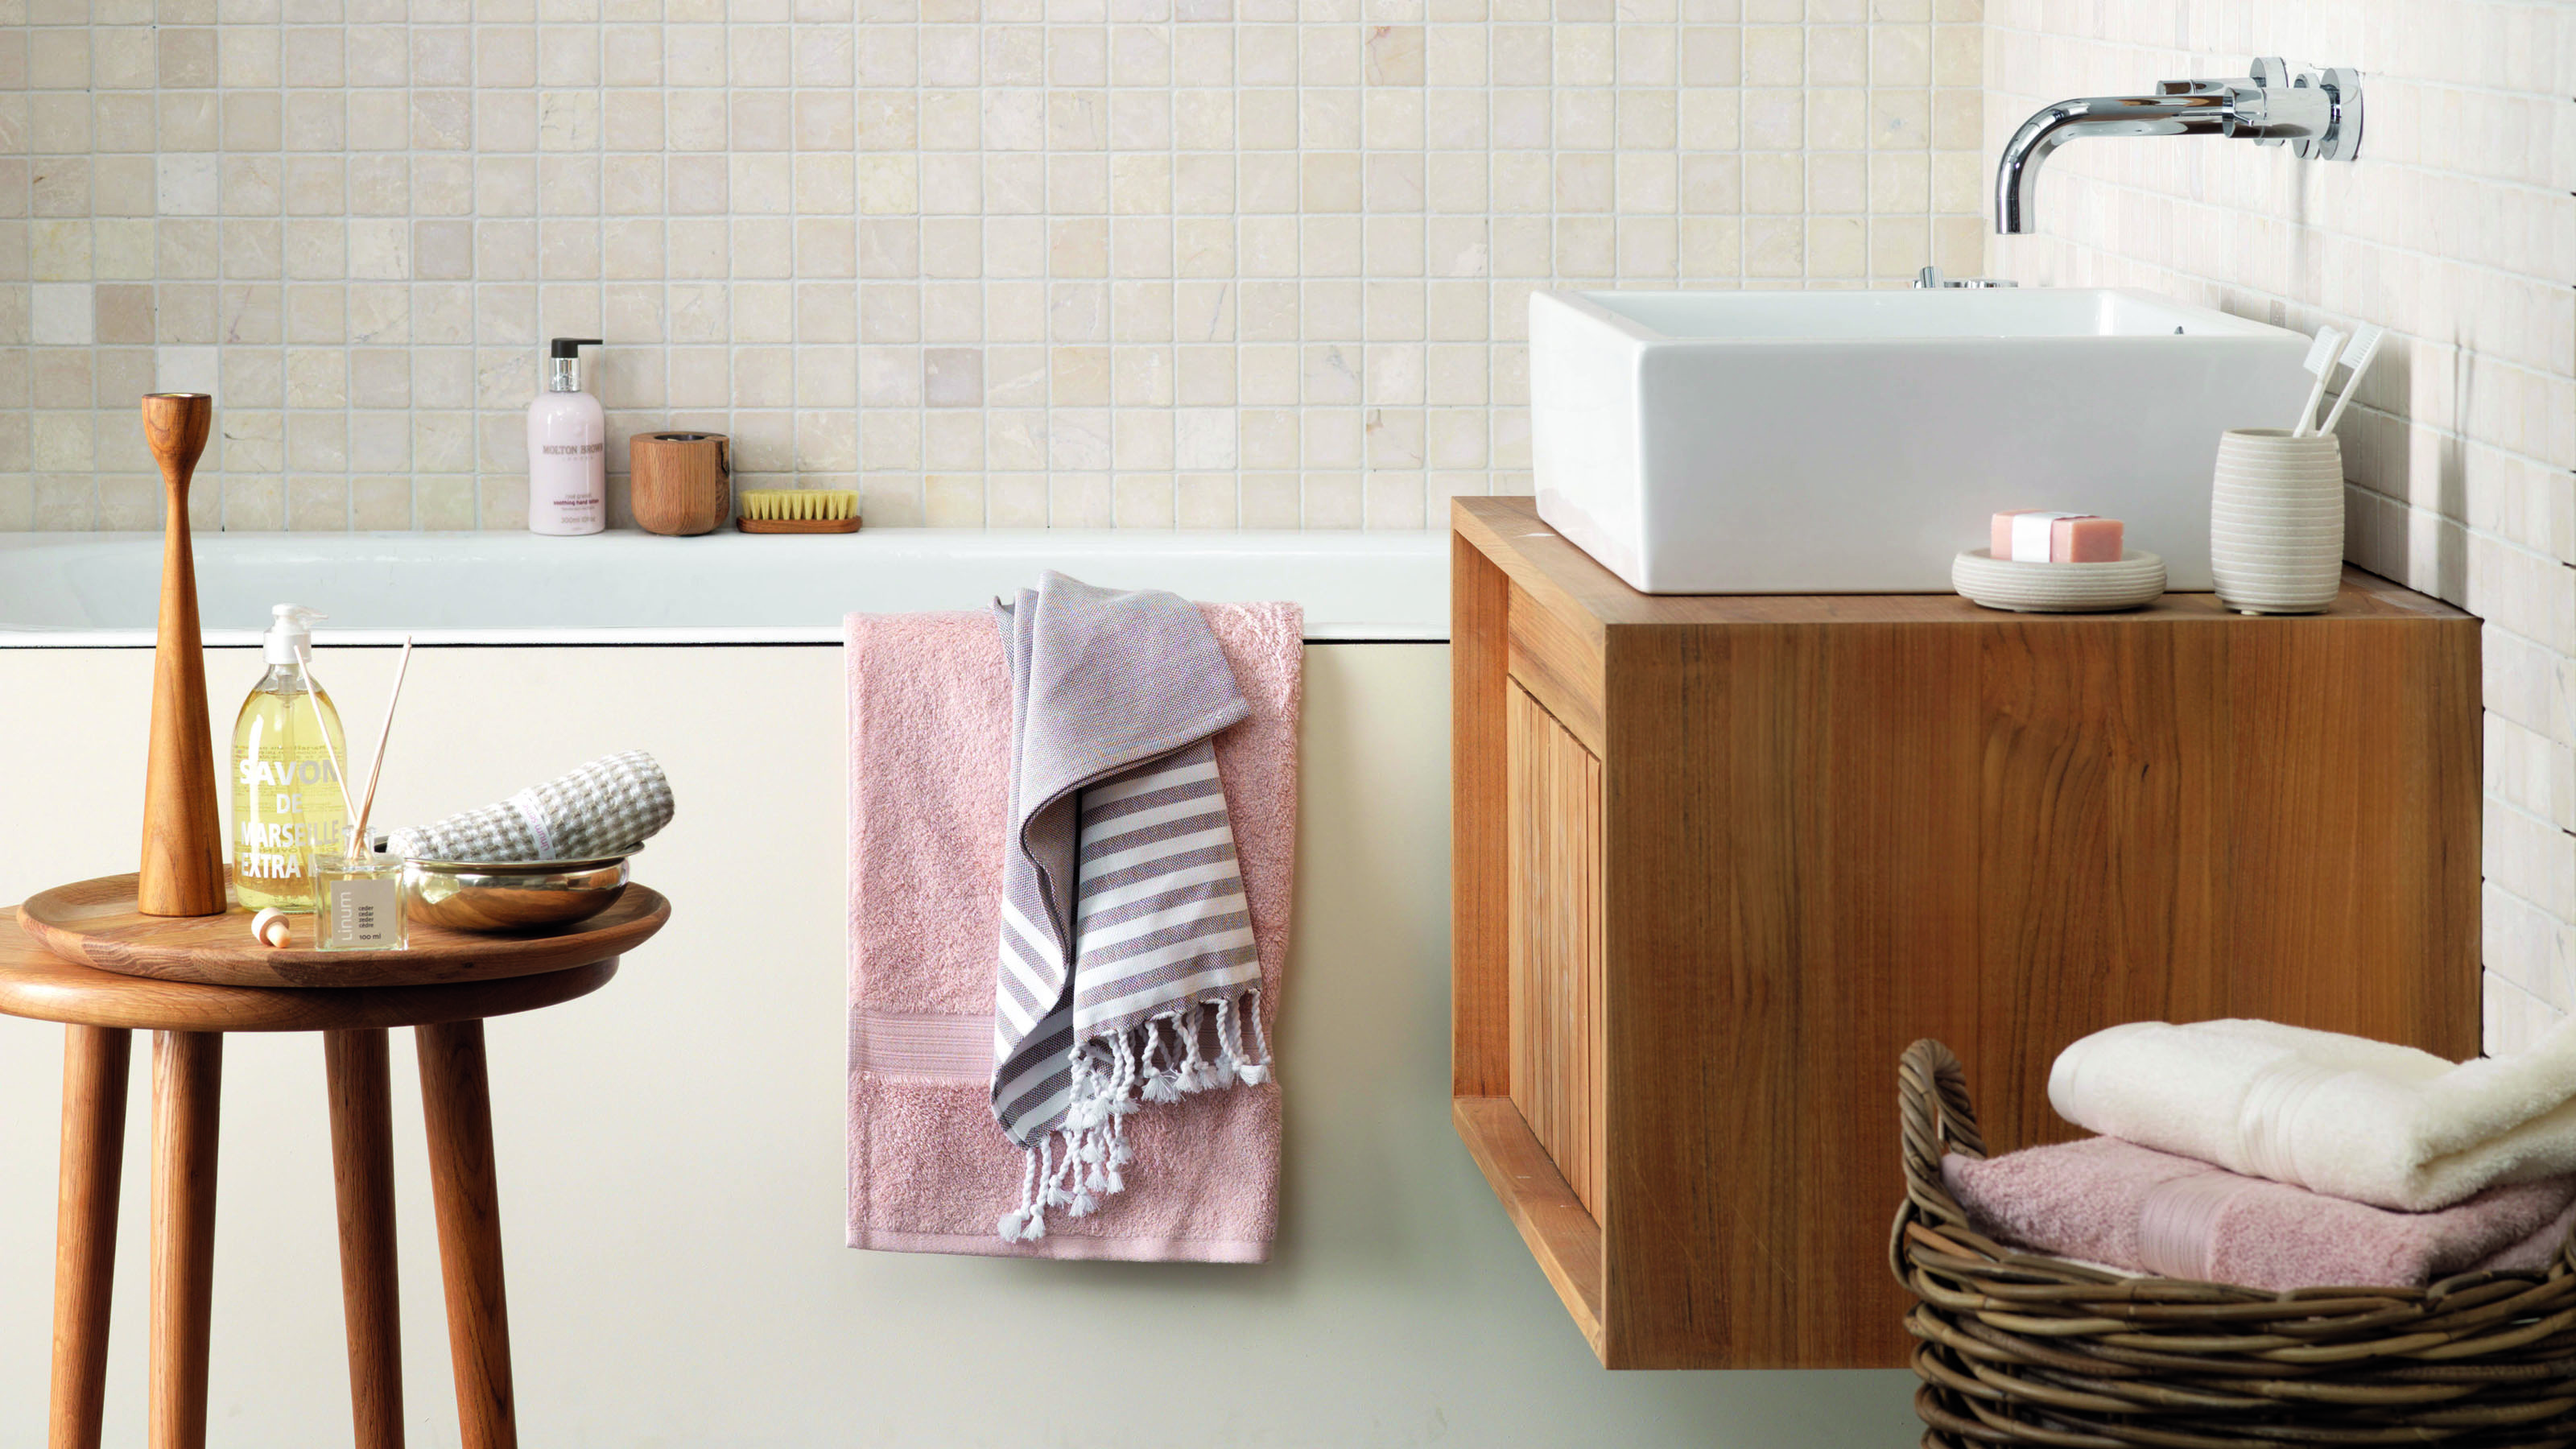 9 Clever Towel Storage Ideas for Your Bathroom